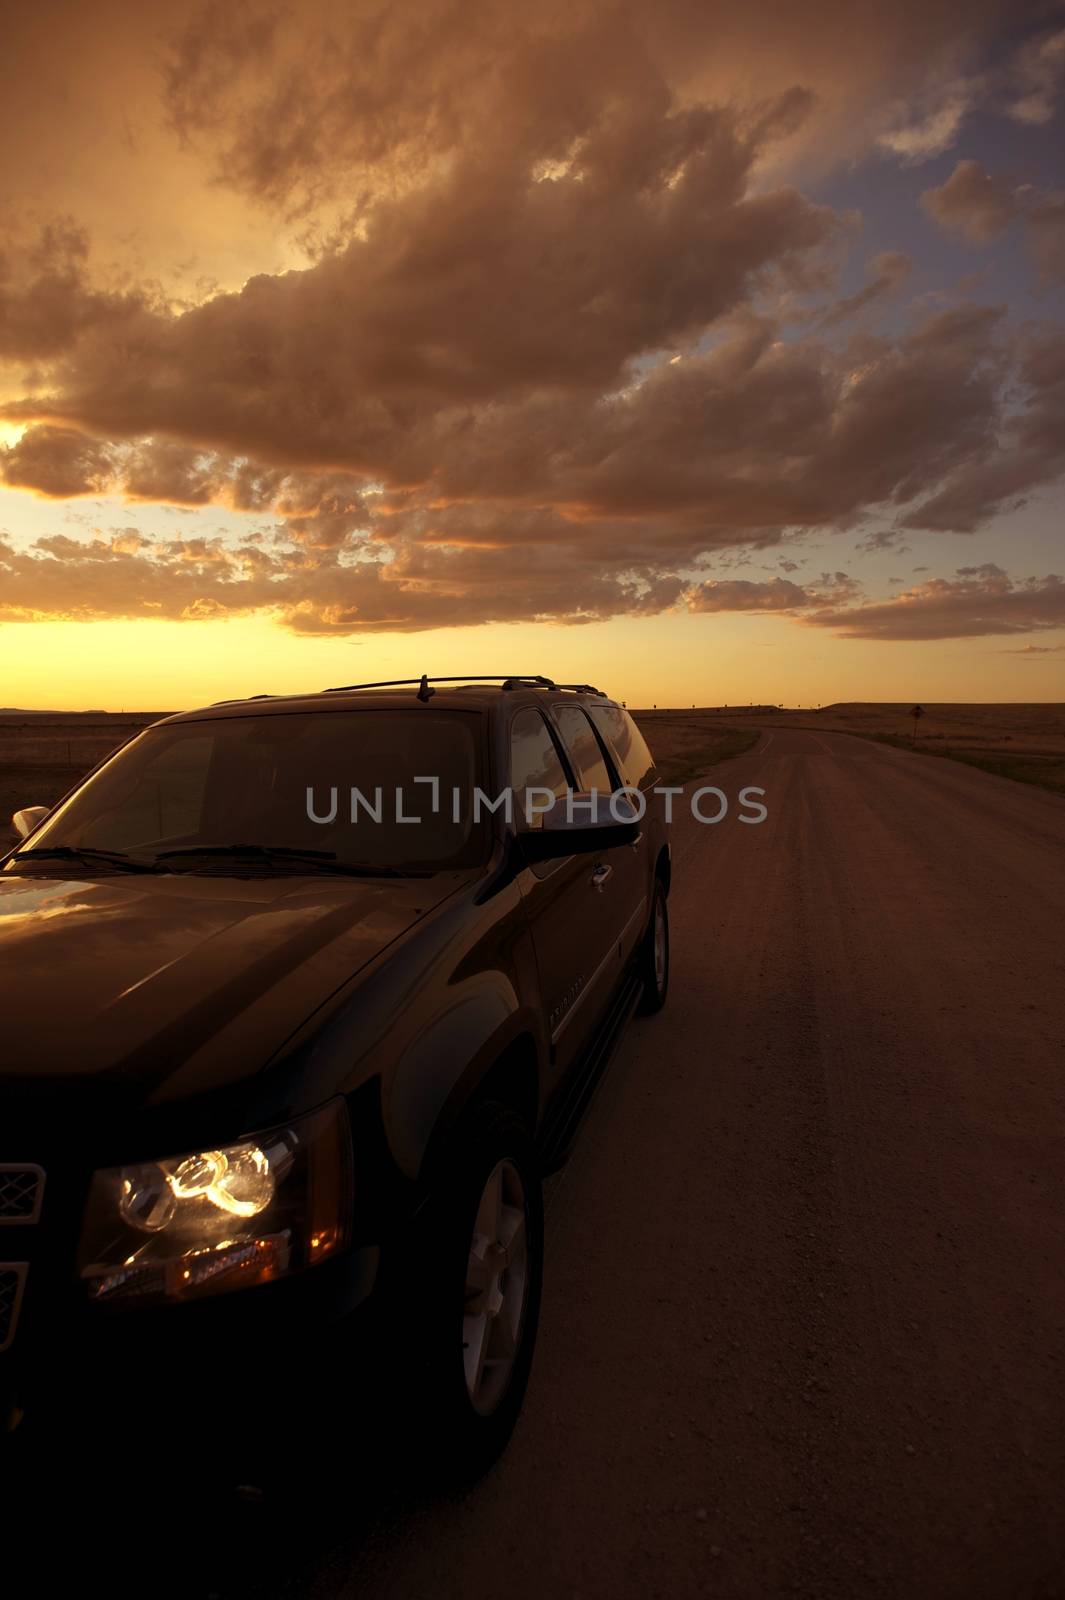 Riding Thru Great American Plains. Black SUV on the Country Road. Vertical Photo at Sunset. Traveling Photo Collection.